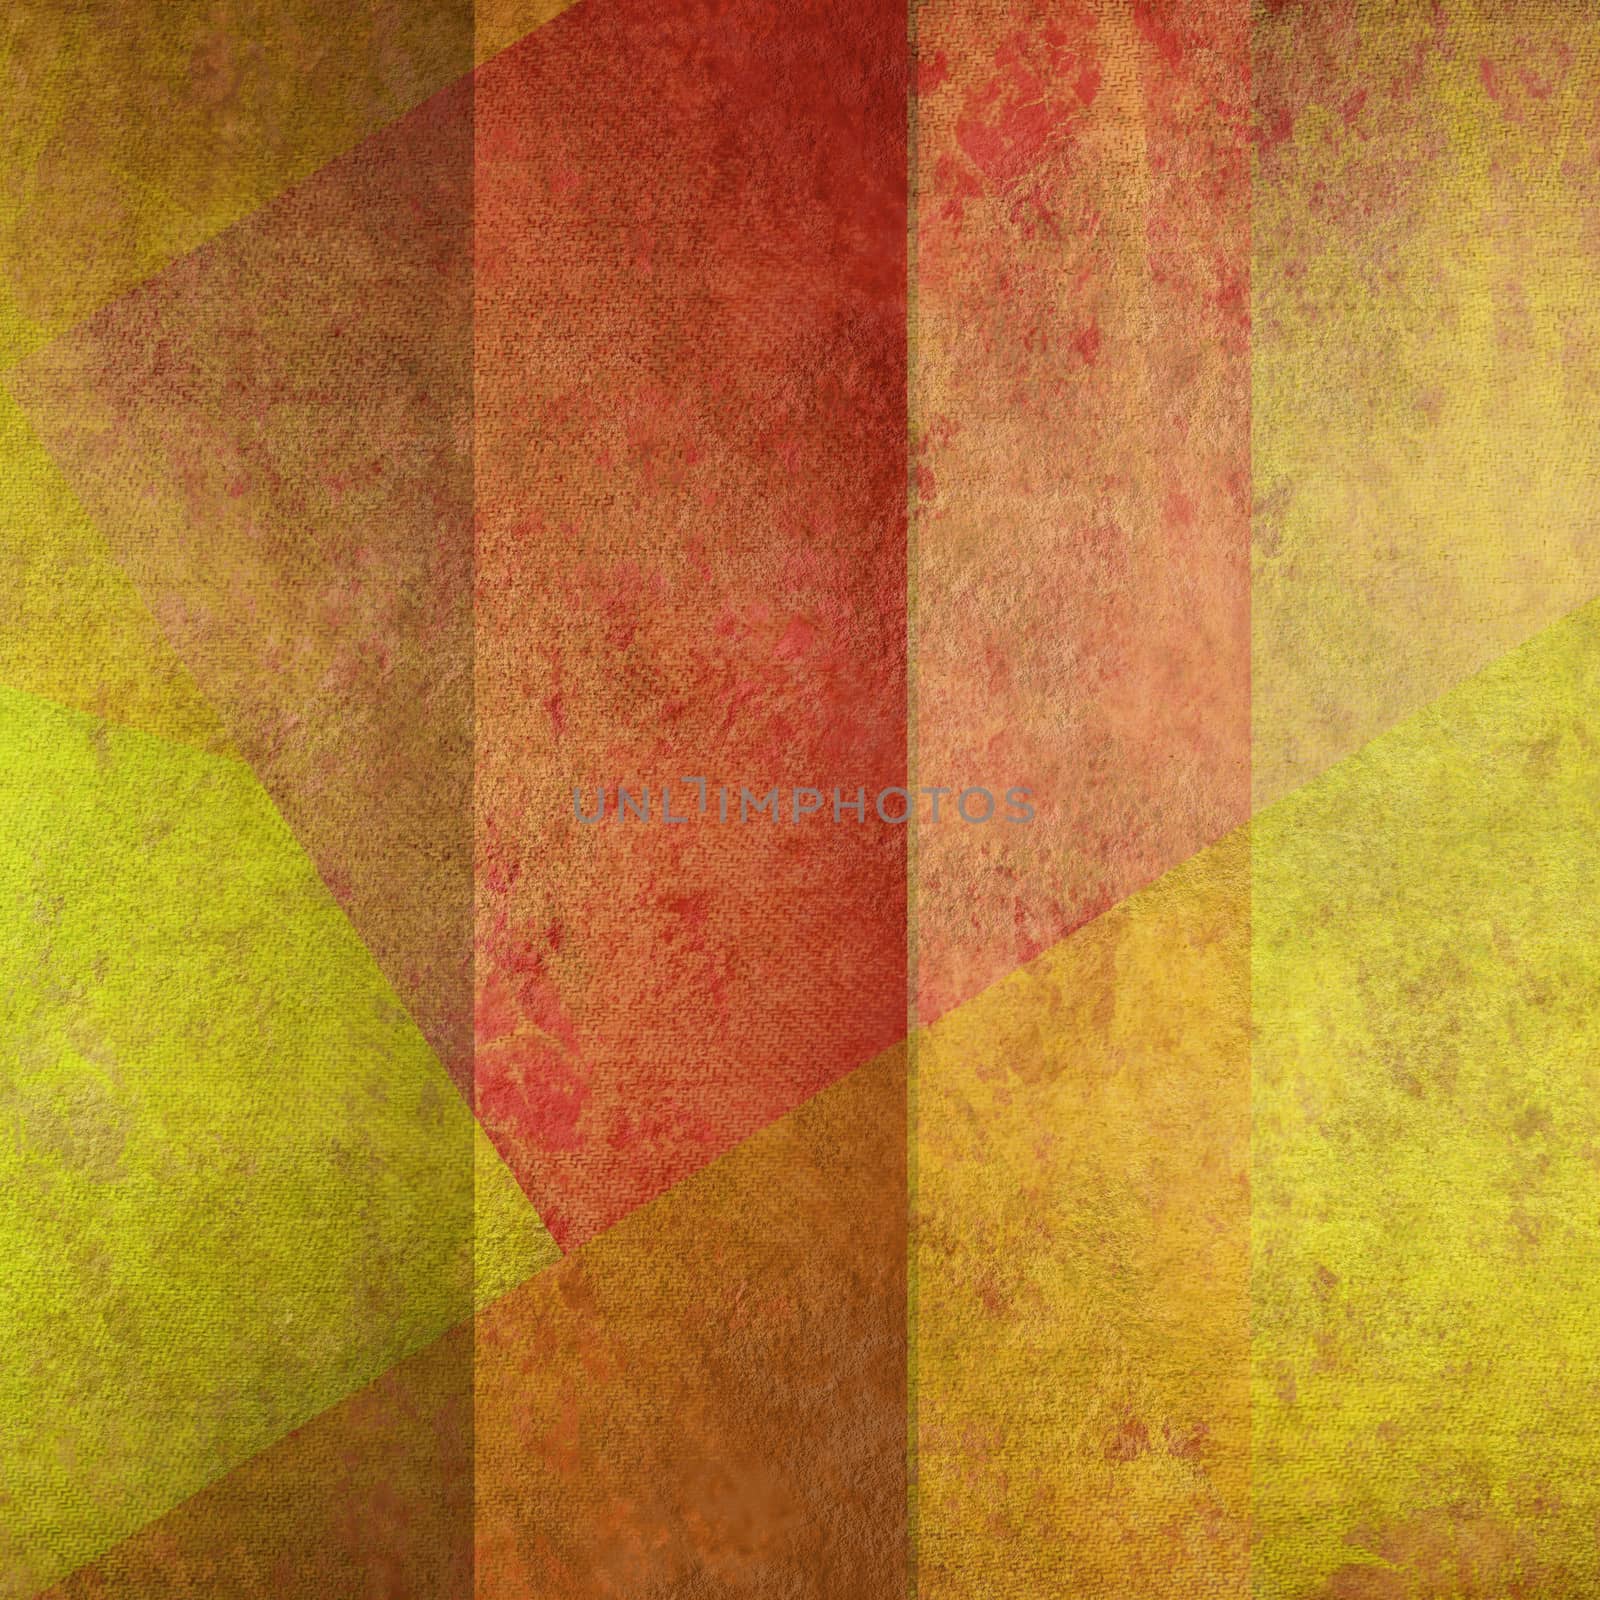 abstract geometric grunge background yelow and orange by Carche